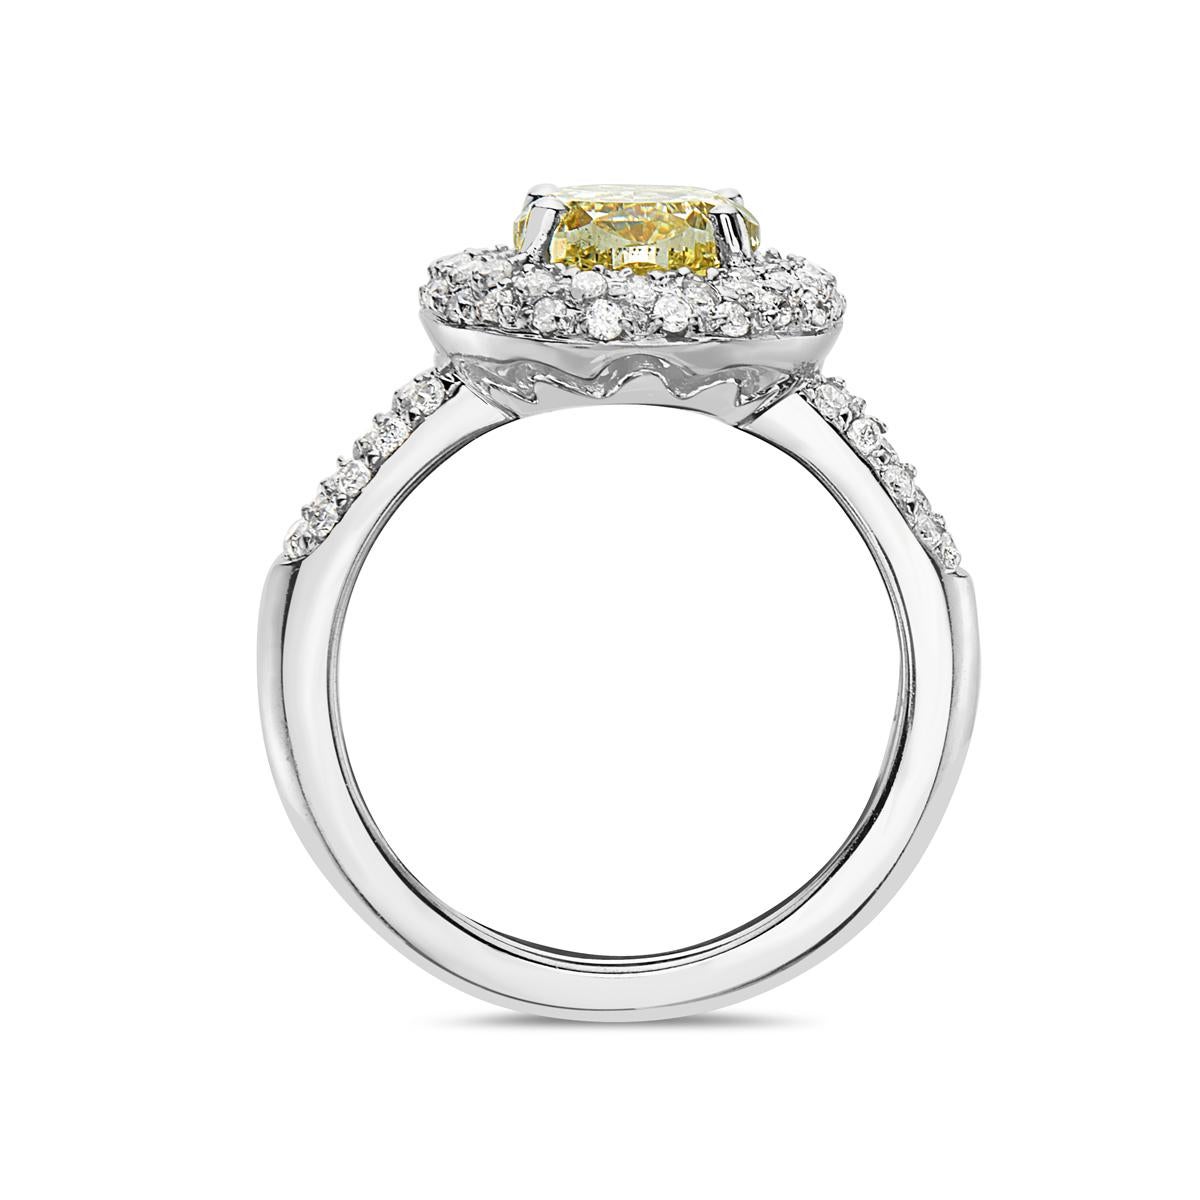 This engagement ring features a 3.09 carat VVS yellow diamond with a G-H VS diamond halo setting weighing 1.10 carats. 7.8 grams total weight. Made in Italy. Size 6 3/4.

Viewings available in our NYC showroom by appointment.